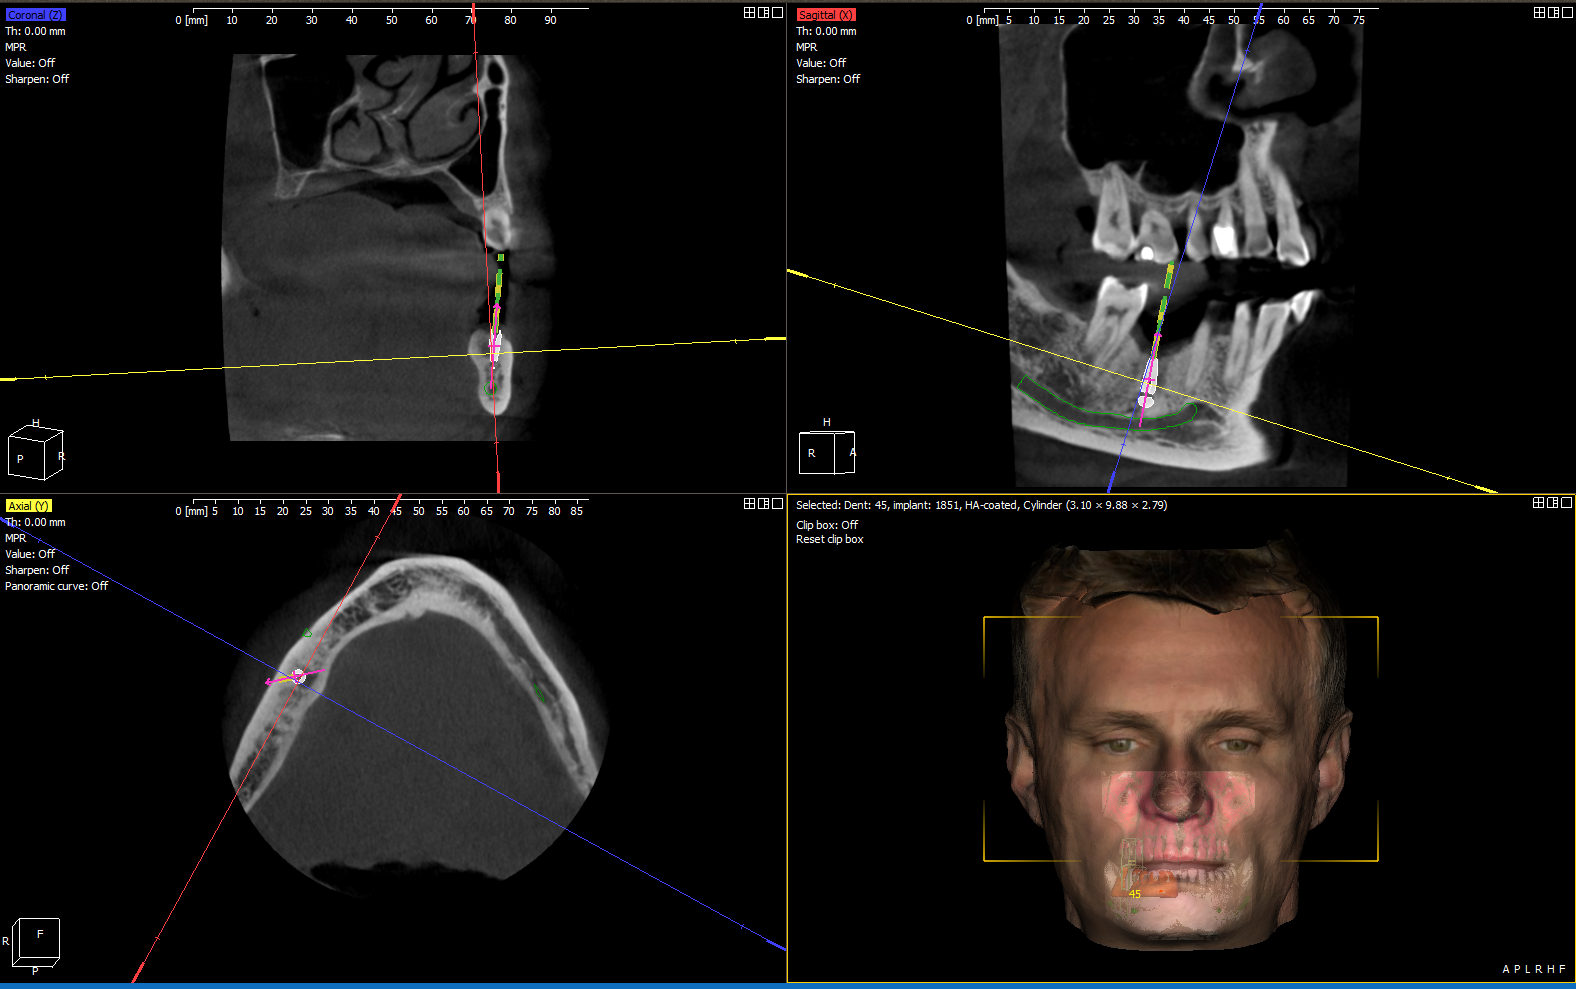 CBCT scan